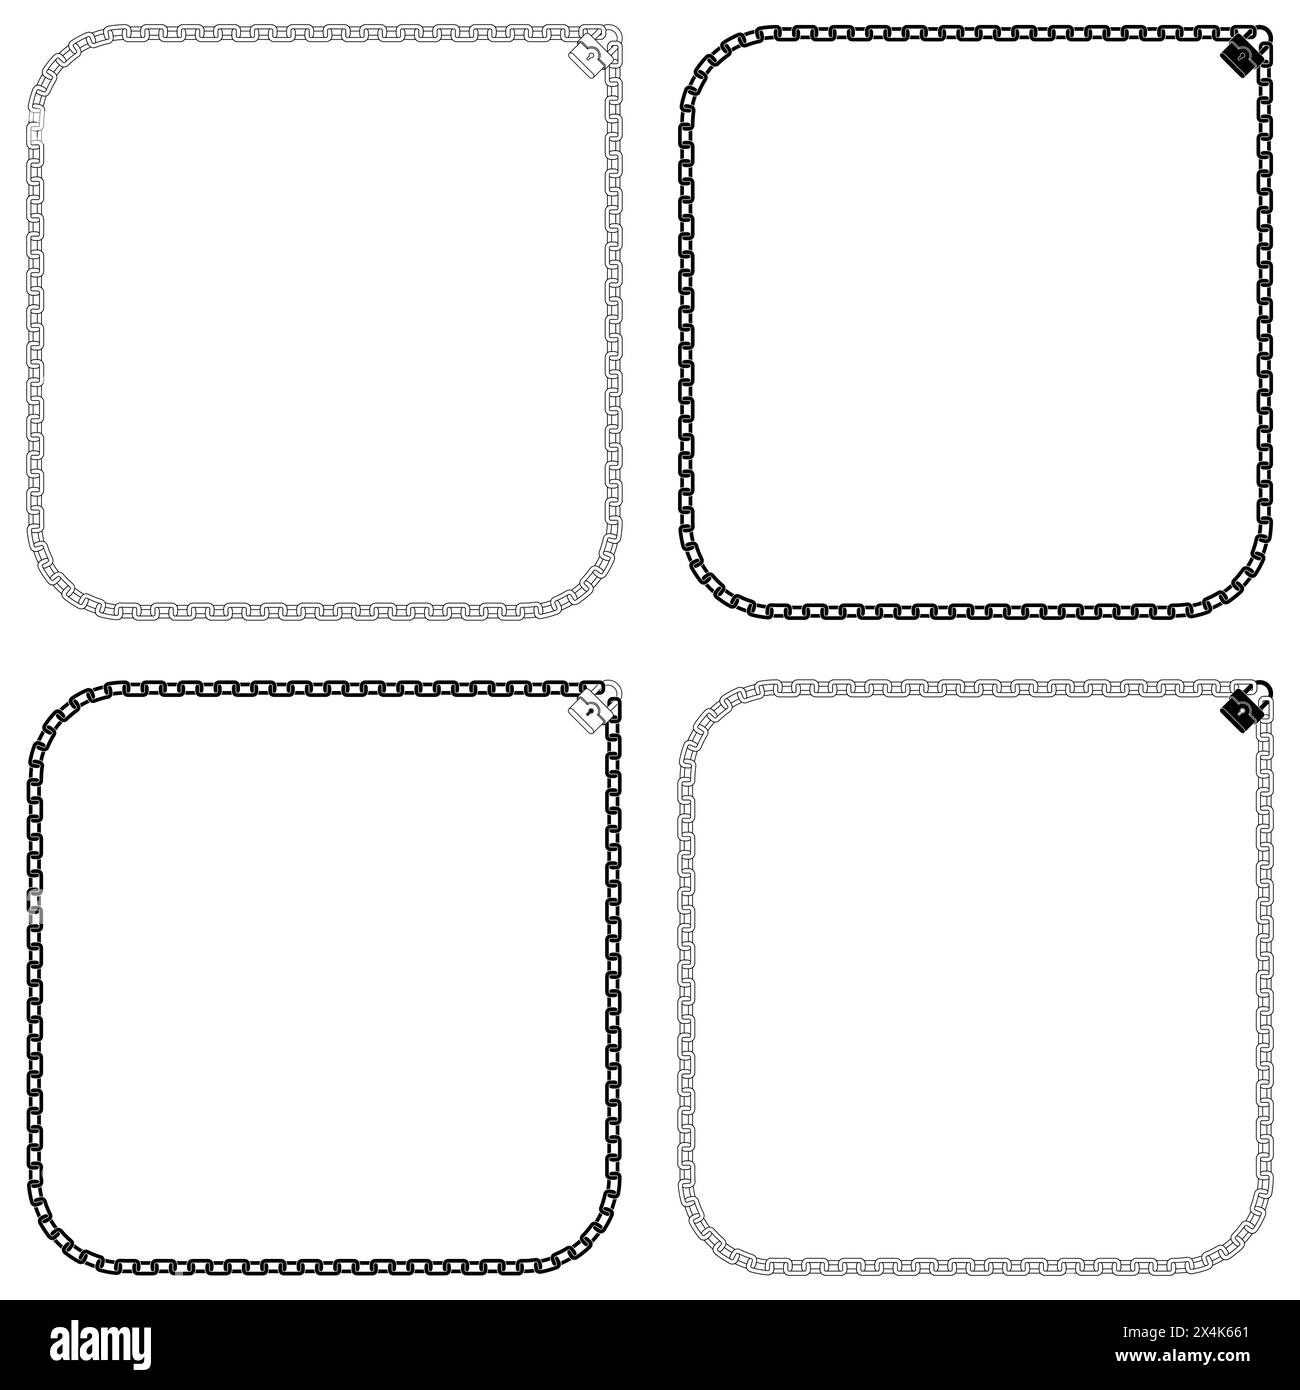 Vector design of frame for photo with chain and padlock, photo border with chains and padlock Stock Vector